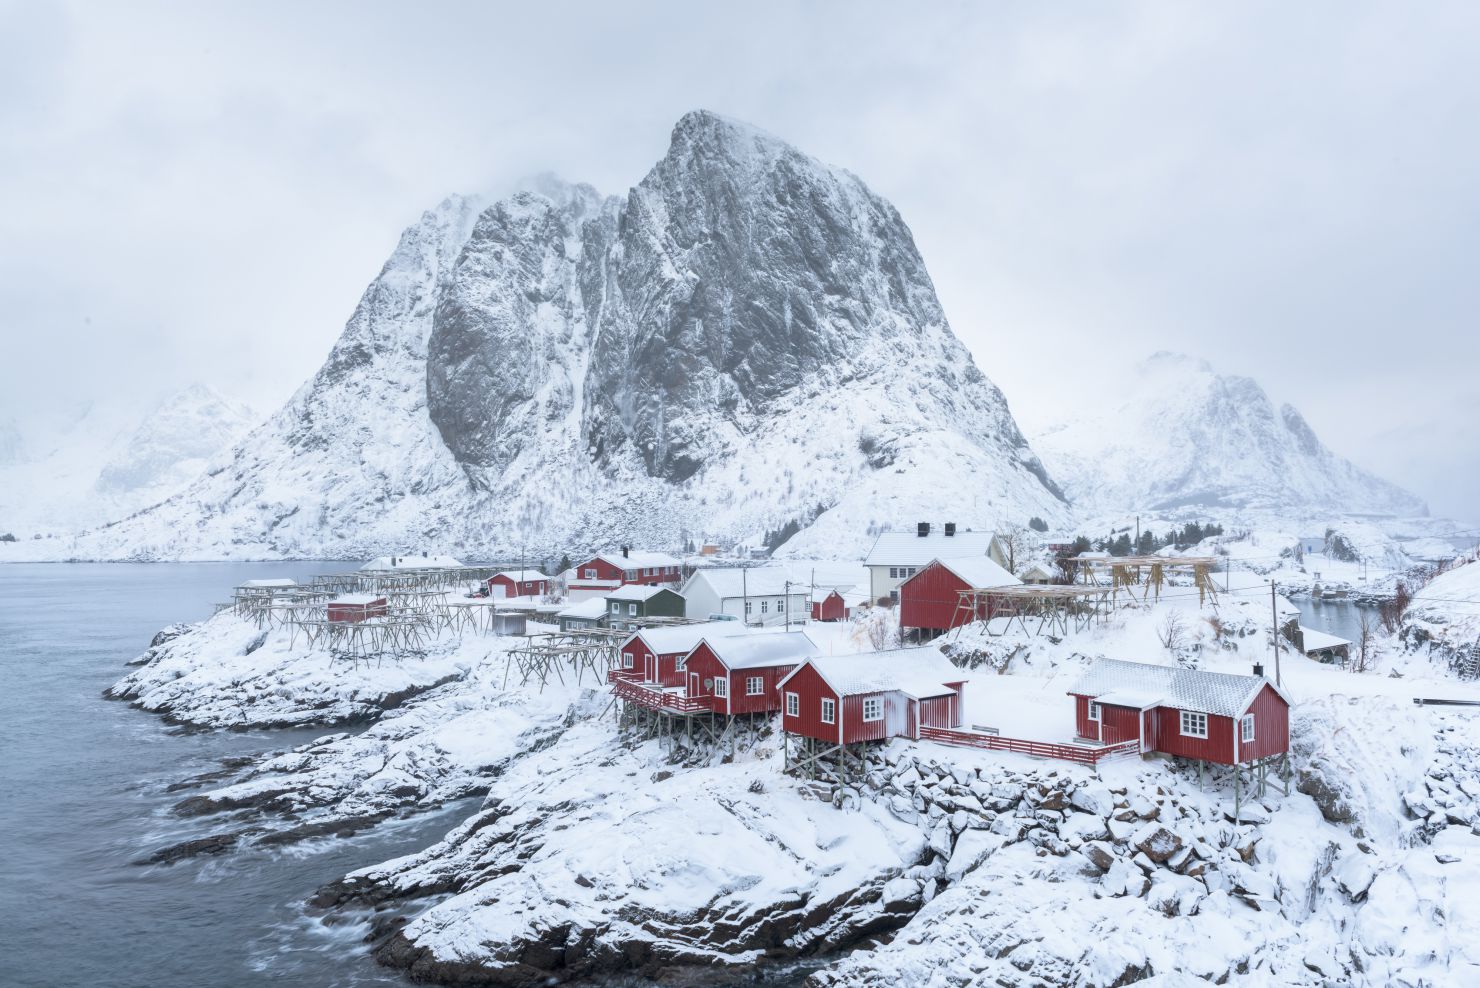 Village of Hamnoy covered in snow